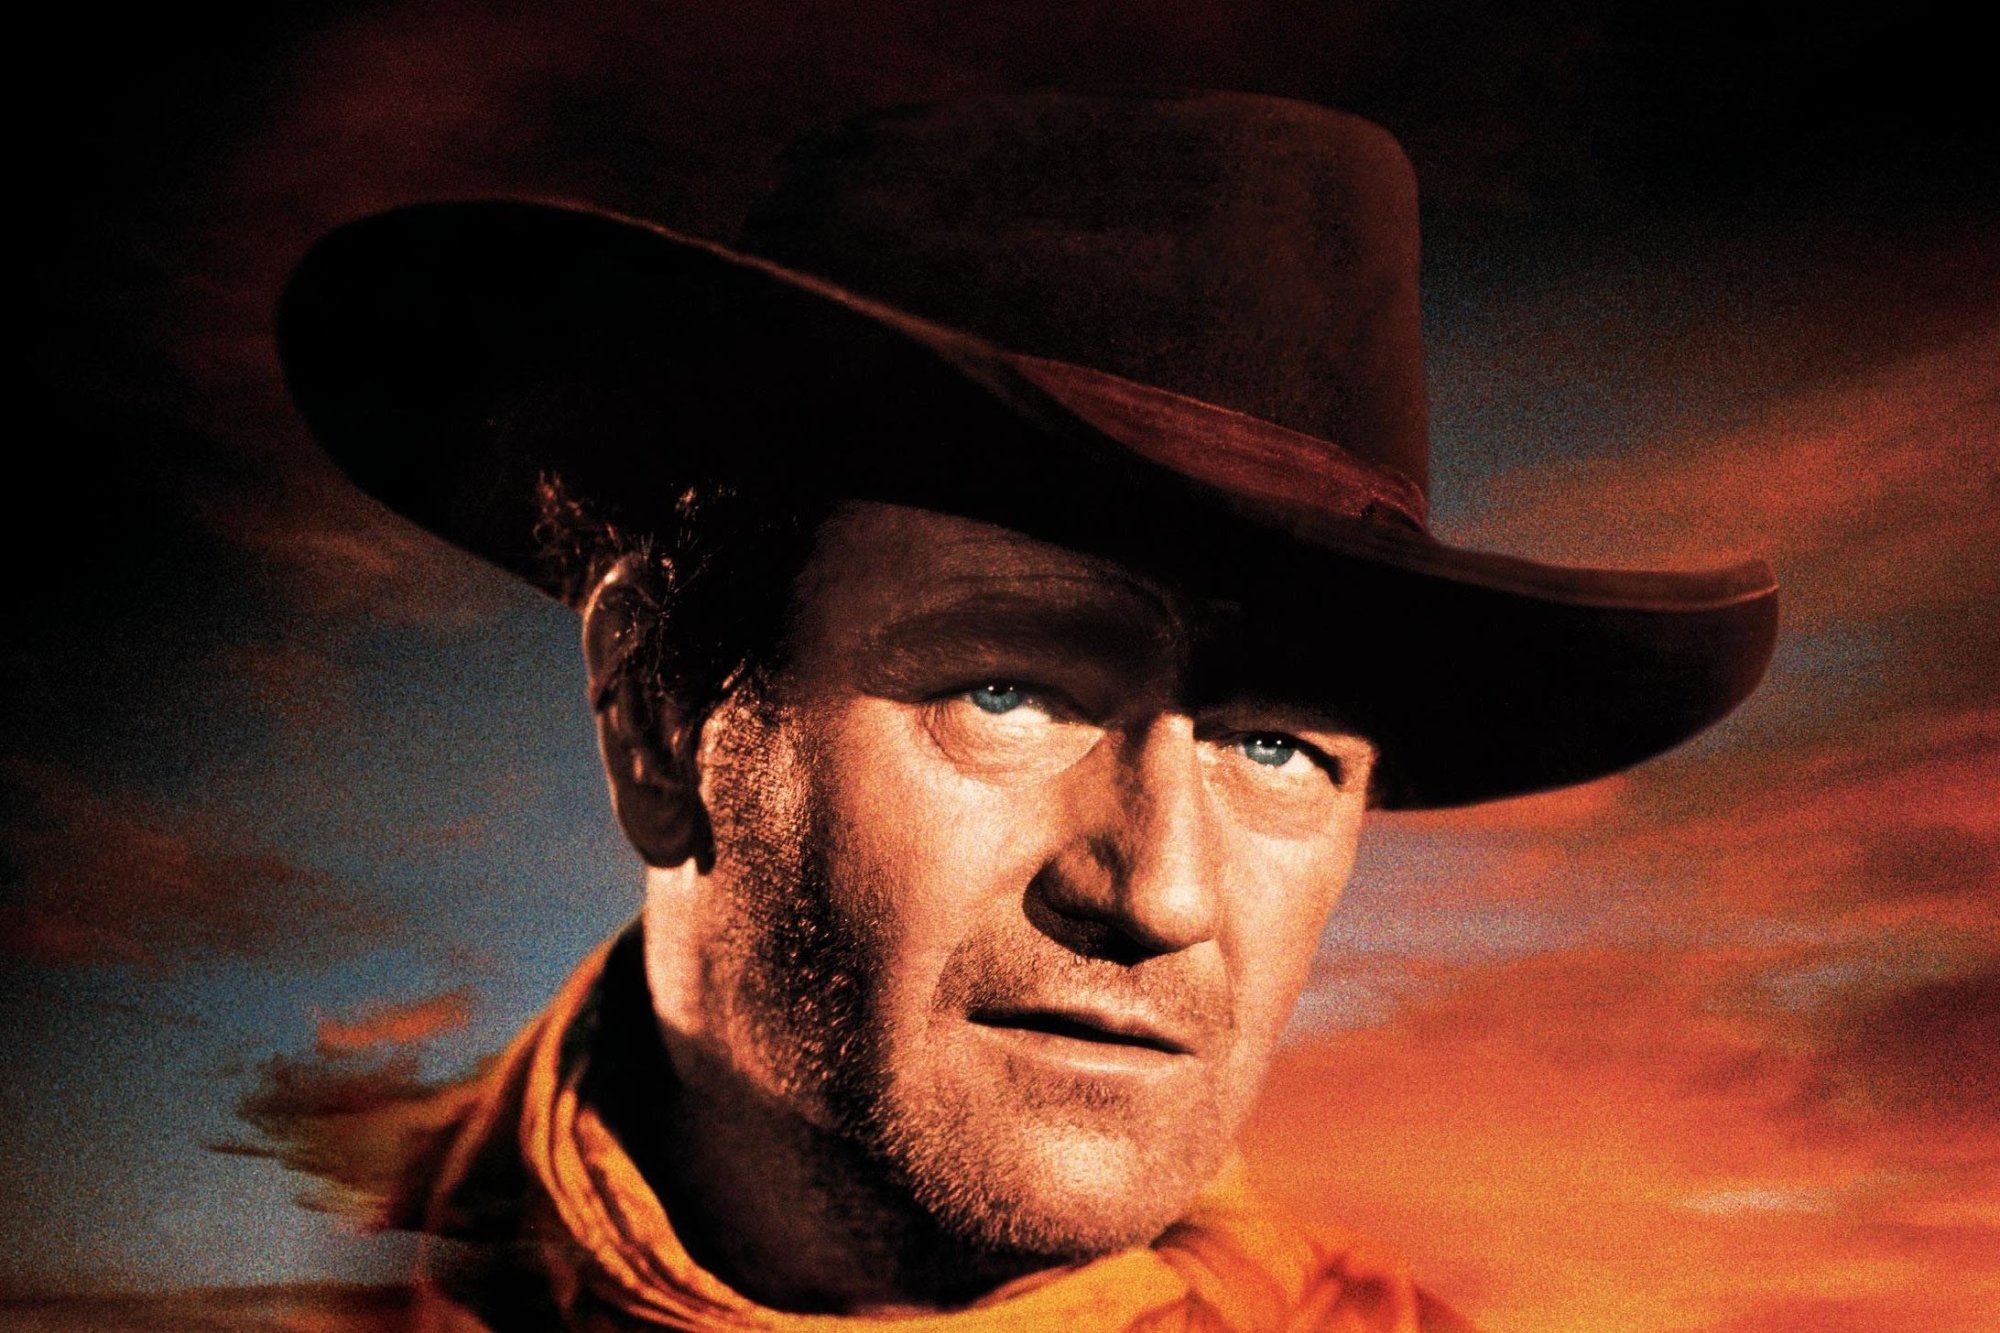 'The Searchers' starring John Wayne, Natalie Wood, and Jeffrey Hunter. Poster showing Wayne wearing a cowboy hat looking ahead with a sunset in the background.